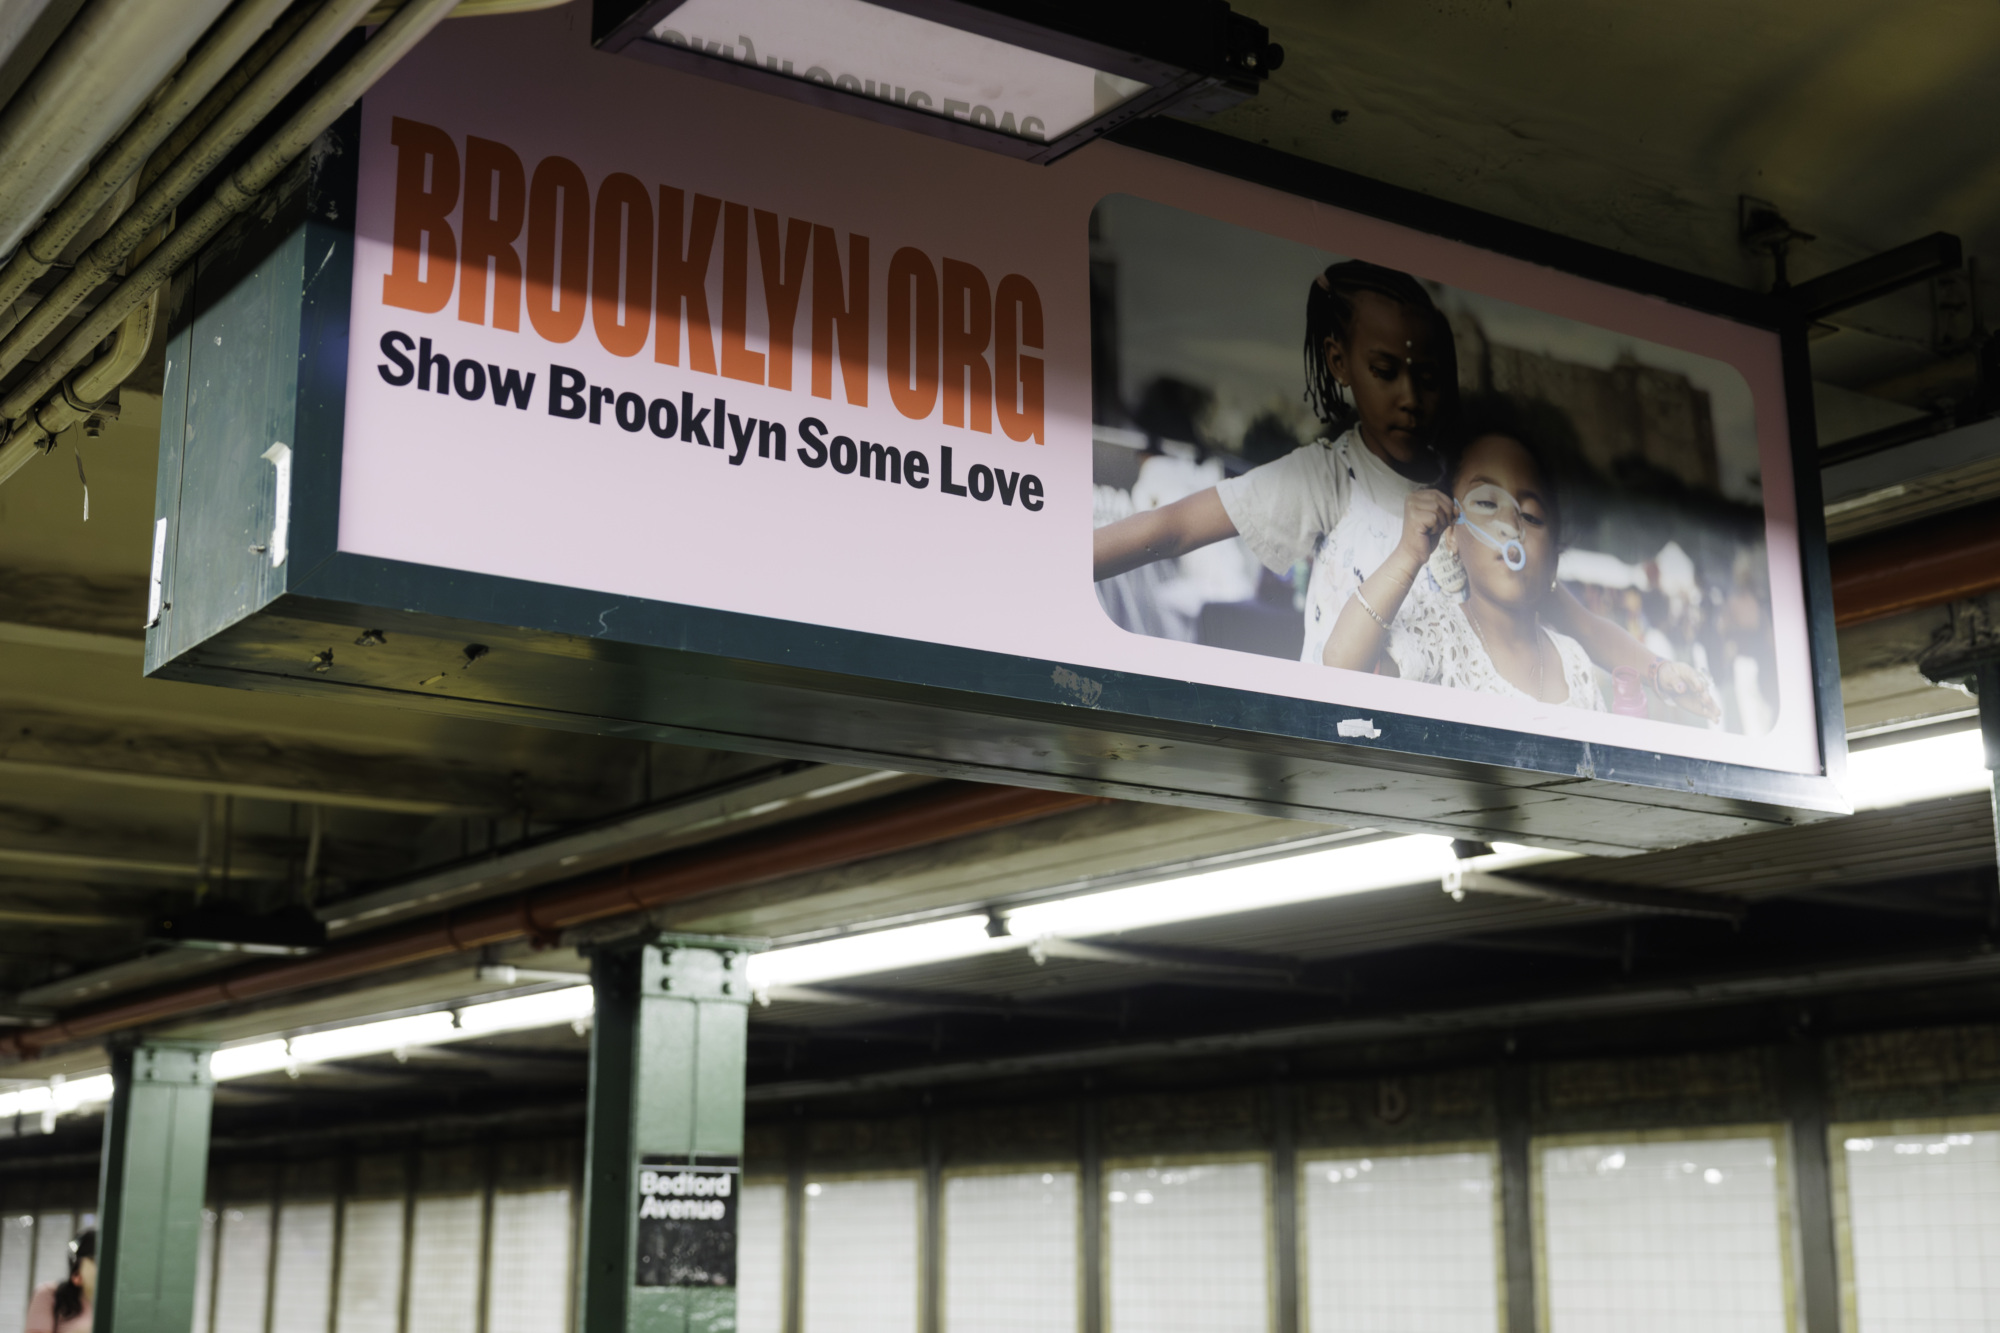 A subway platform with a sign displaying "BROOKLYN.ORG Show Brooklyn Some Love" and an image of two children, one blowing bubbles. The station name, "Bedford Avenue," is visible on the platform post, illustrating the warmth and spirit of those who give to Brooklyn.